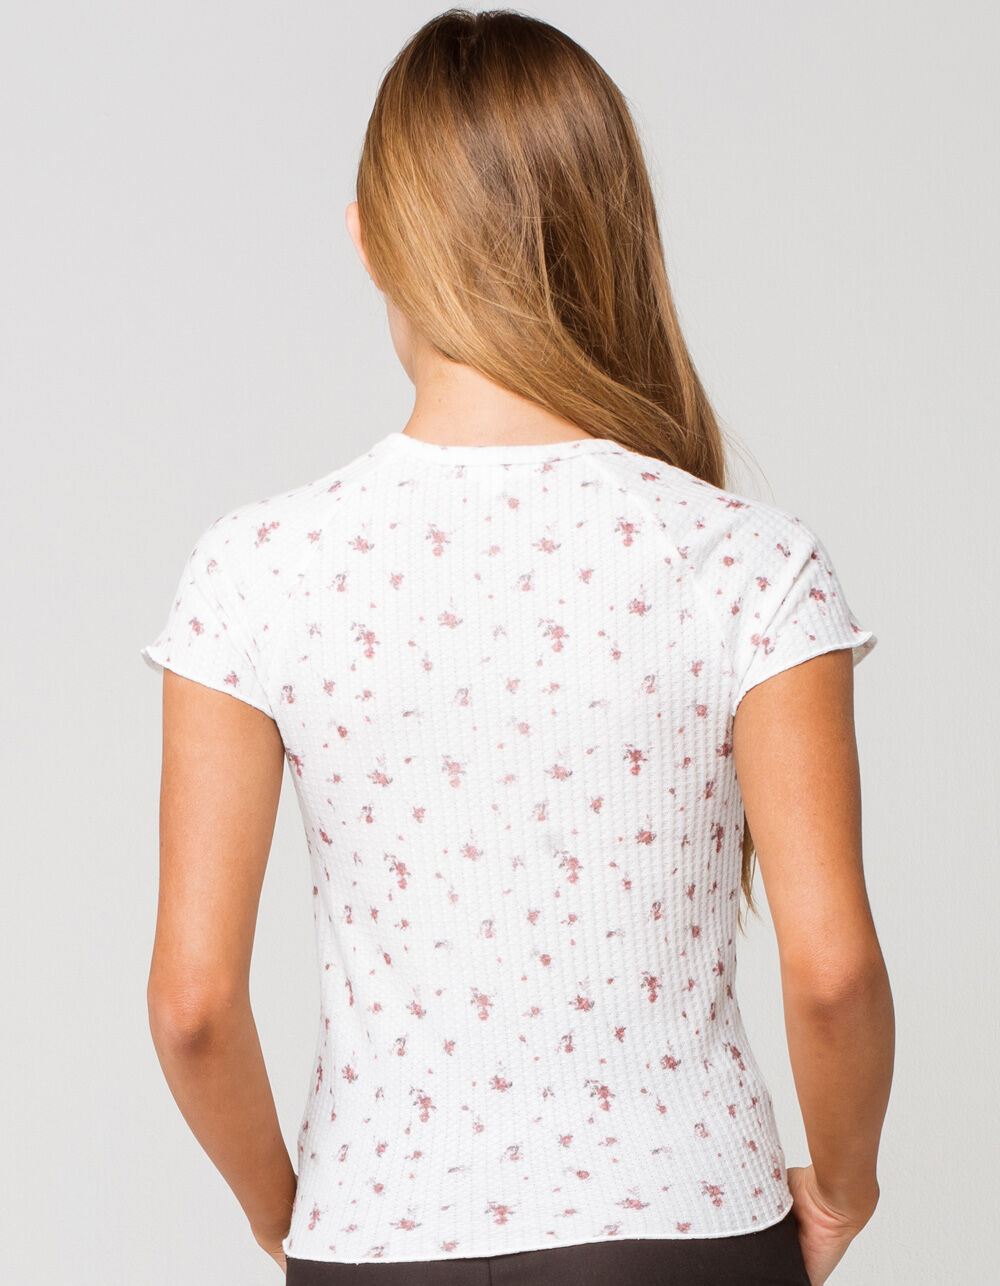 COCO & JAIMESON Floral Womens Thermal Top - WHITE COMBO